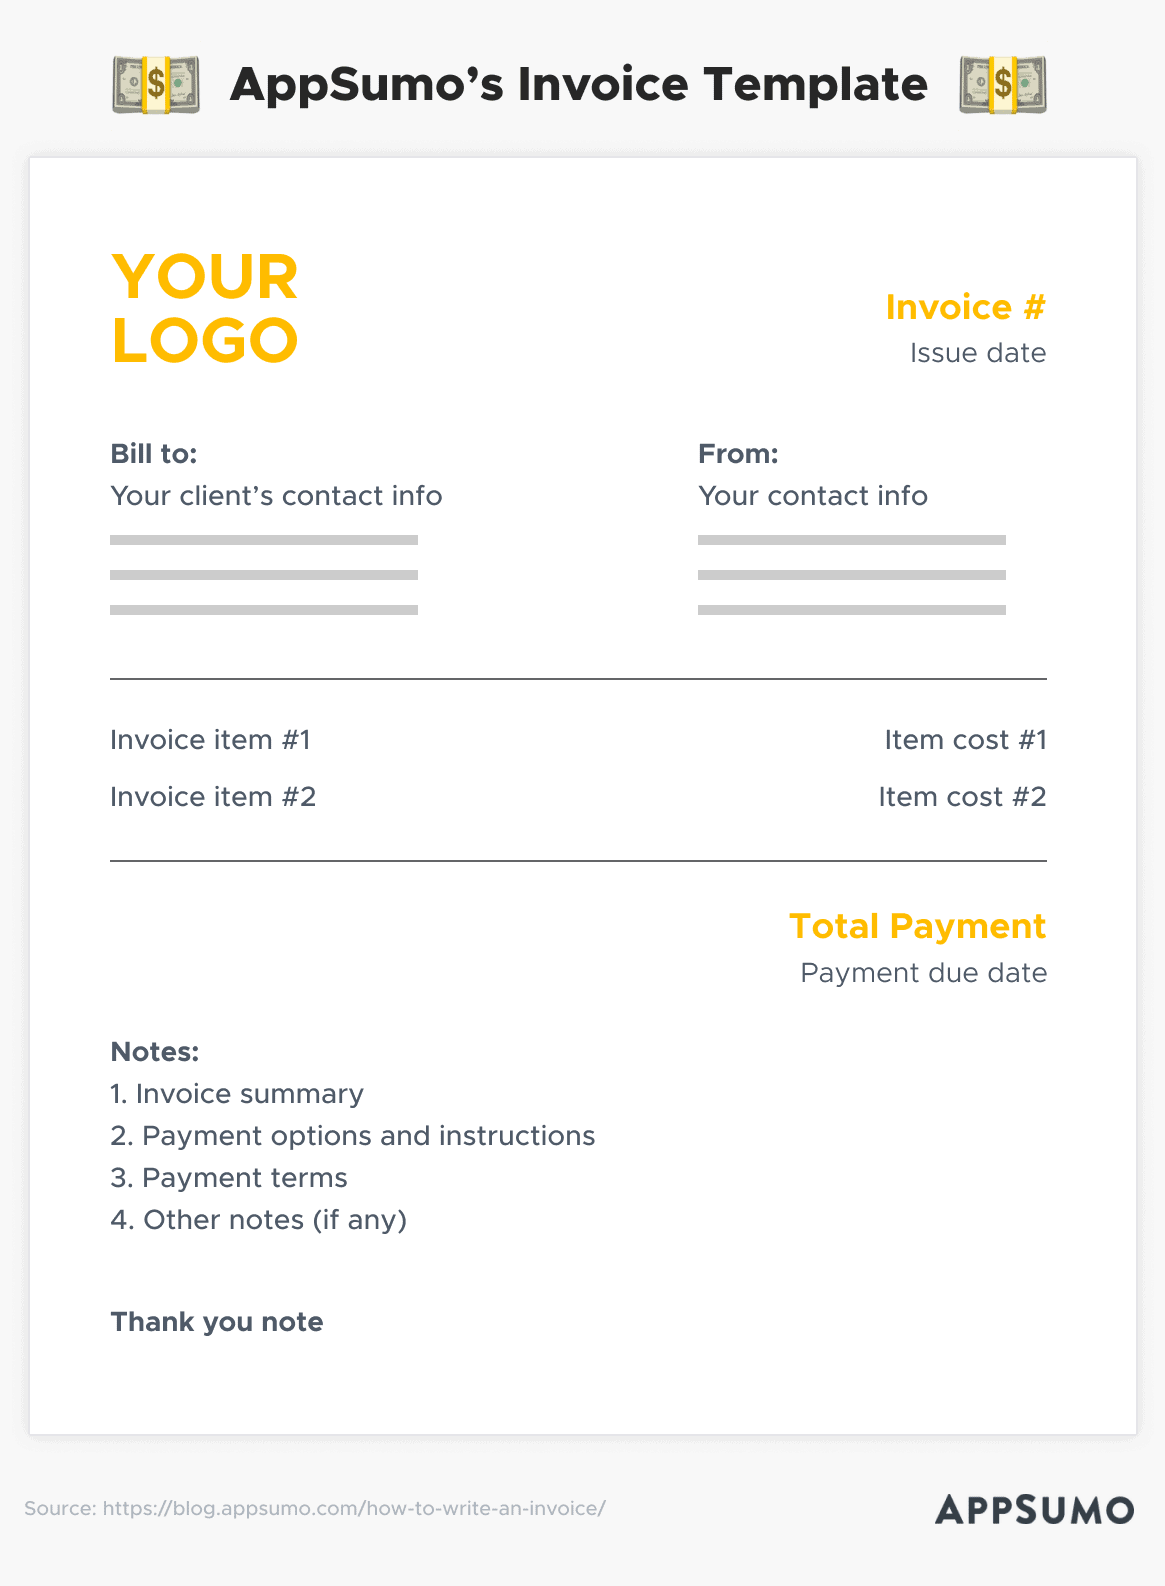 How to Write an Invoice to Get Paid Fast (with Templates)